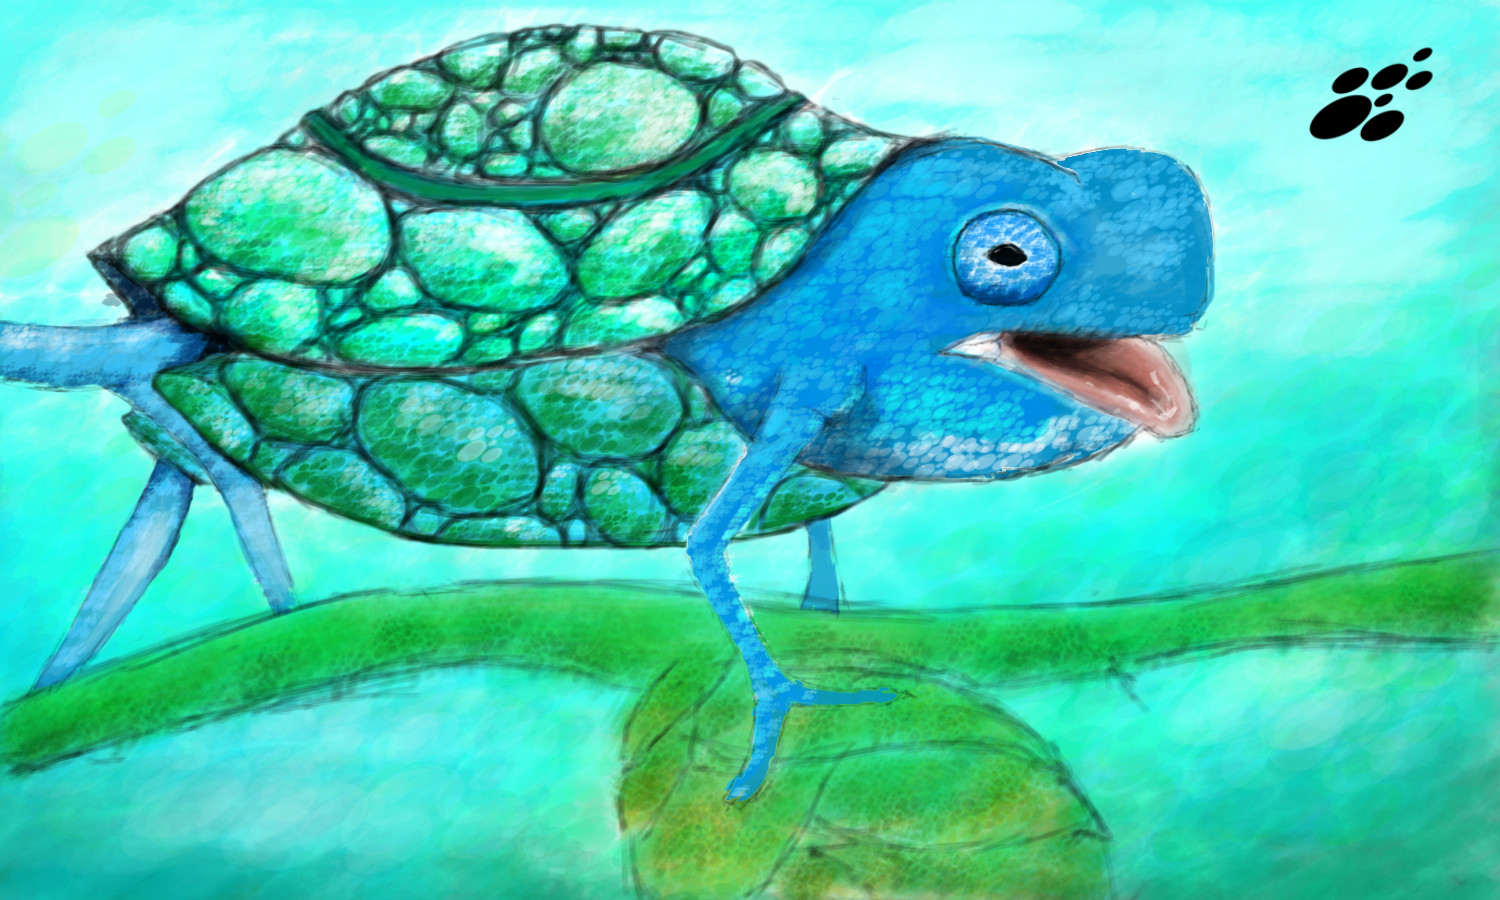 using a single custom brush whilst merging two animals together, this is an example of a chameleon and a turtle.